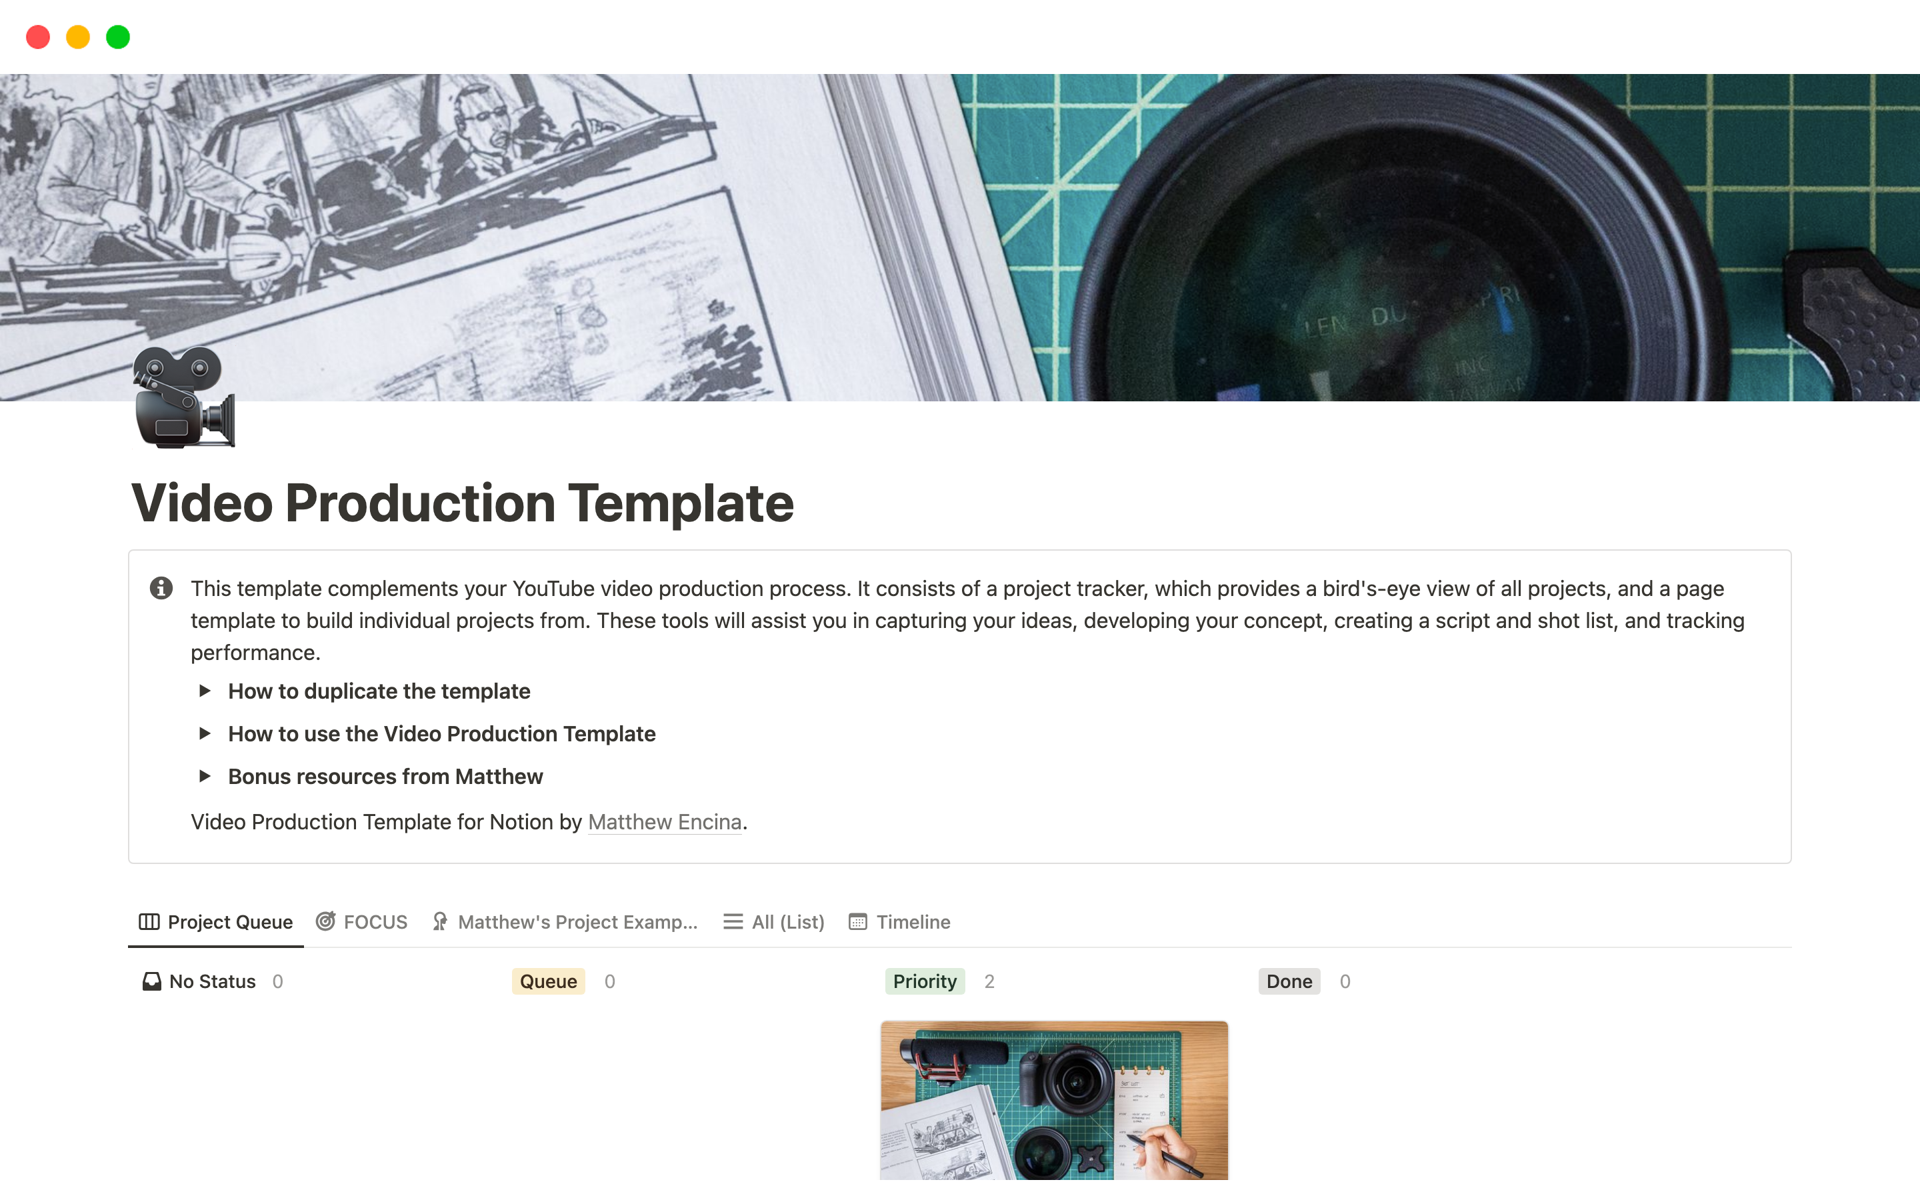 The Video Production template is designed for creators who produce long-form content on YouTube and need a comprehensive workflow to develop ideas, plan their production, and track and organize projects. 